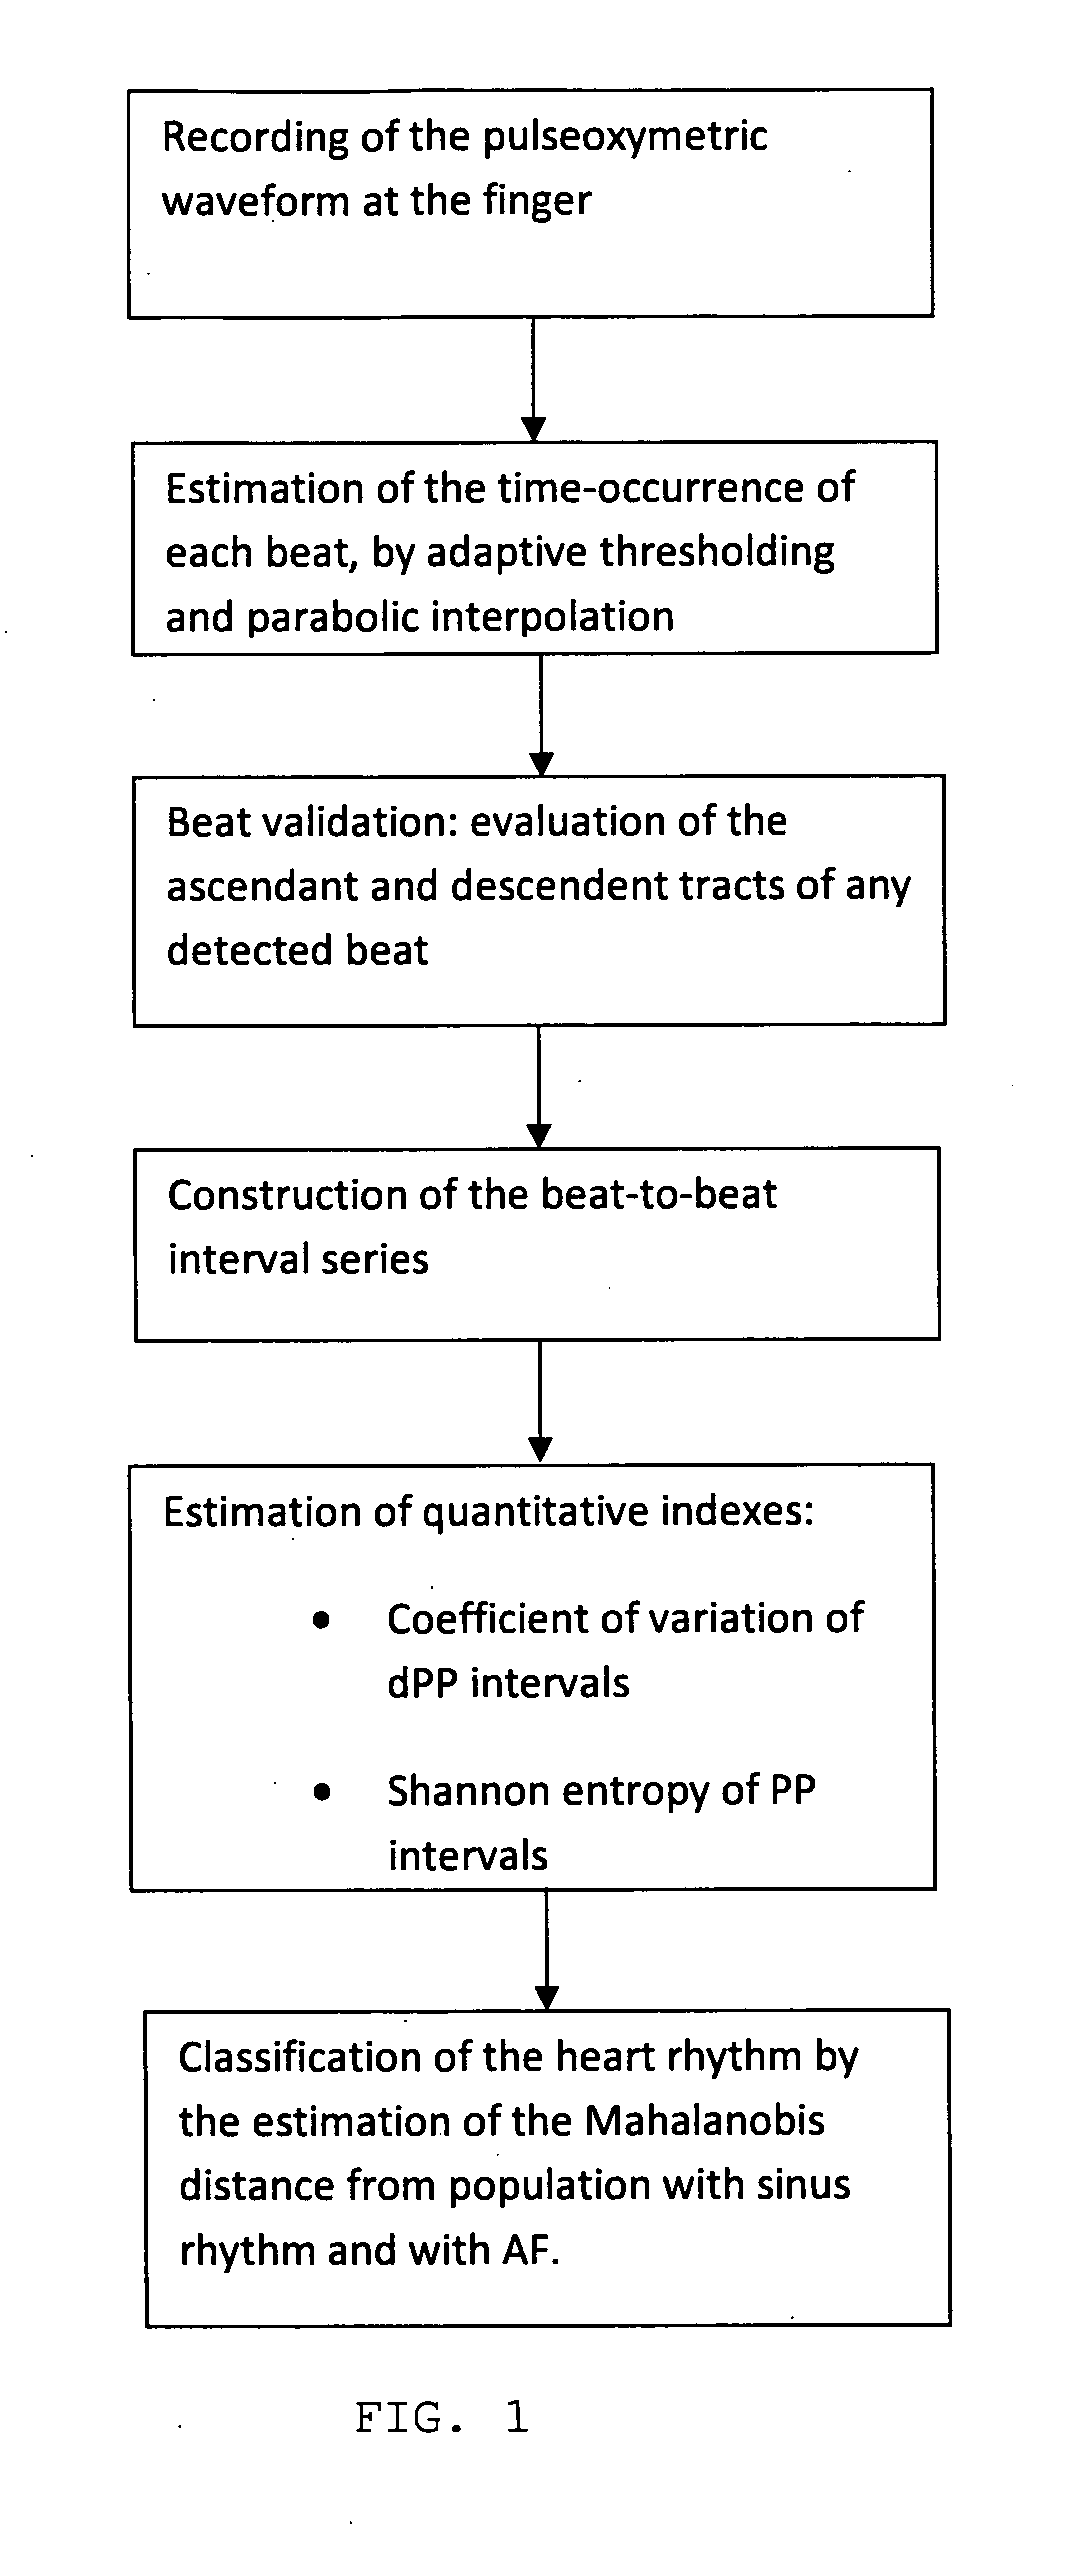 Portable pulseoximeter for a direct and immediate automated evaluation of the cardiac rhythm (regularity) and related method